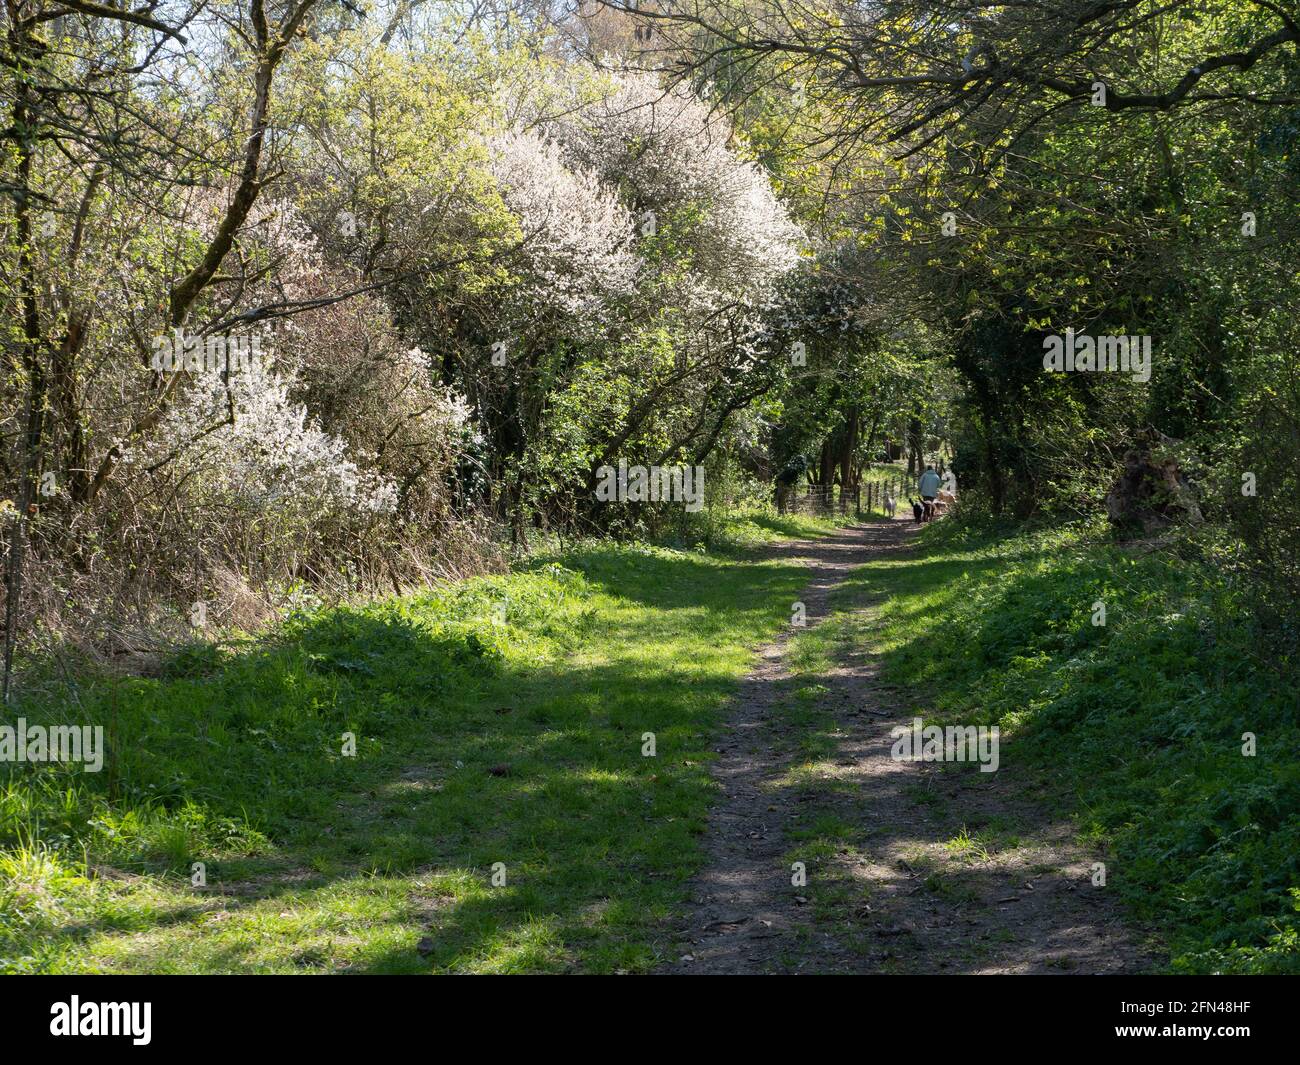 A tree lined bridlepath in spring sunshine, popular with dog walkers near Upton Scudamore, Wiltshire, England, UK. Stock Photo